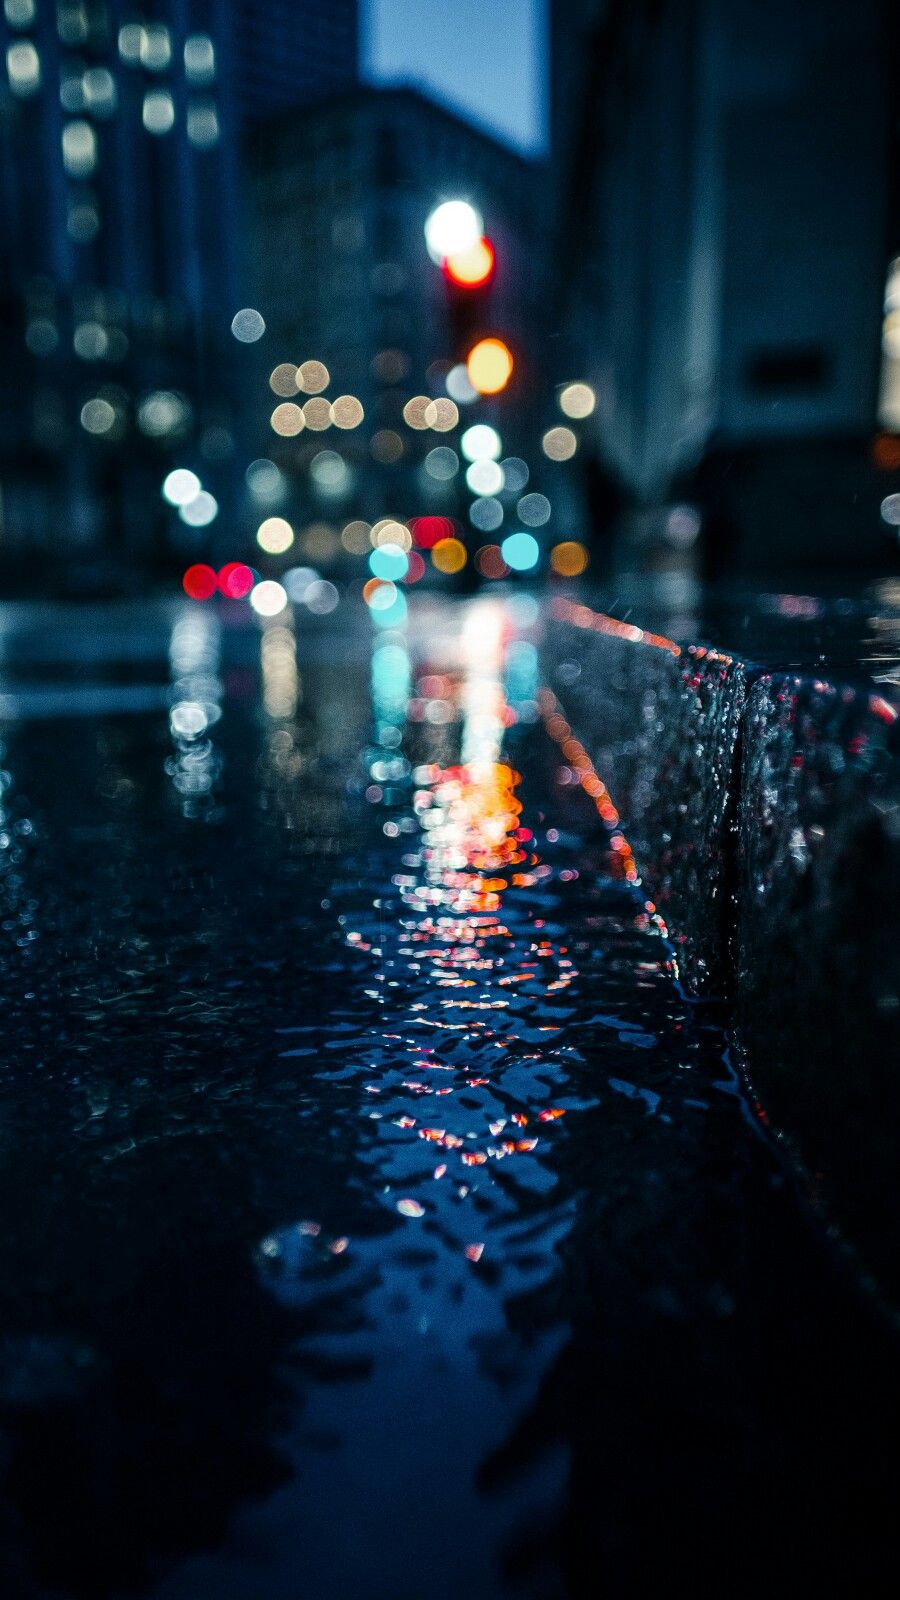 wallpaper for android tumblr,water,blue,reflection,night,rain